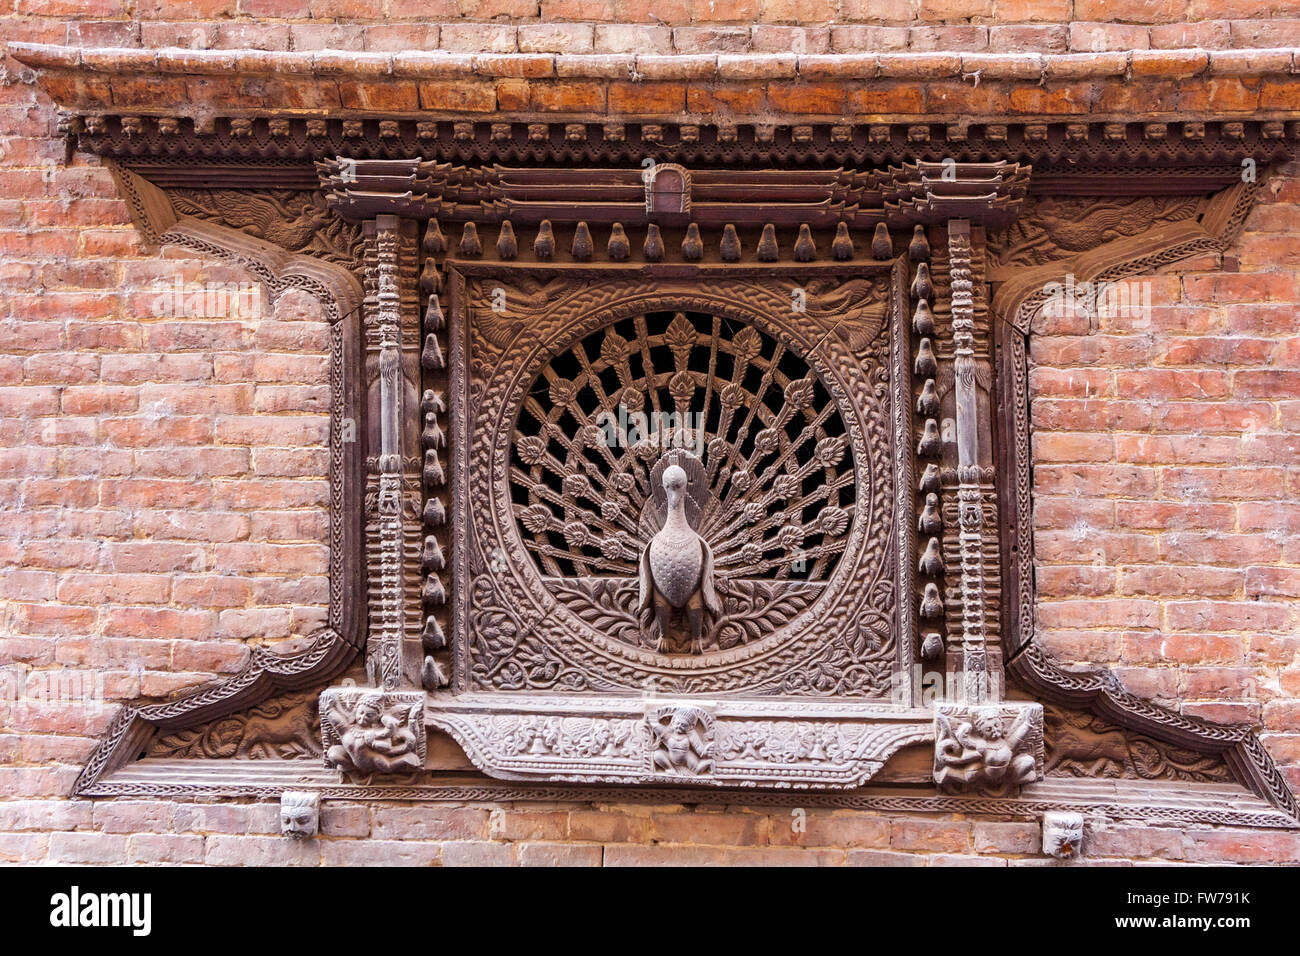 Bhaktapur, Nepal.  The Peacock Window, in Pujari Math.  Building was heavily damaged in 2015 earthquake but the window survived. Stock Photo